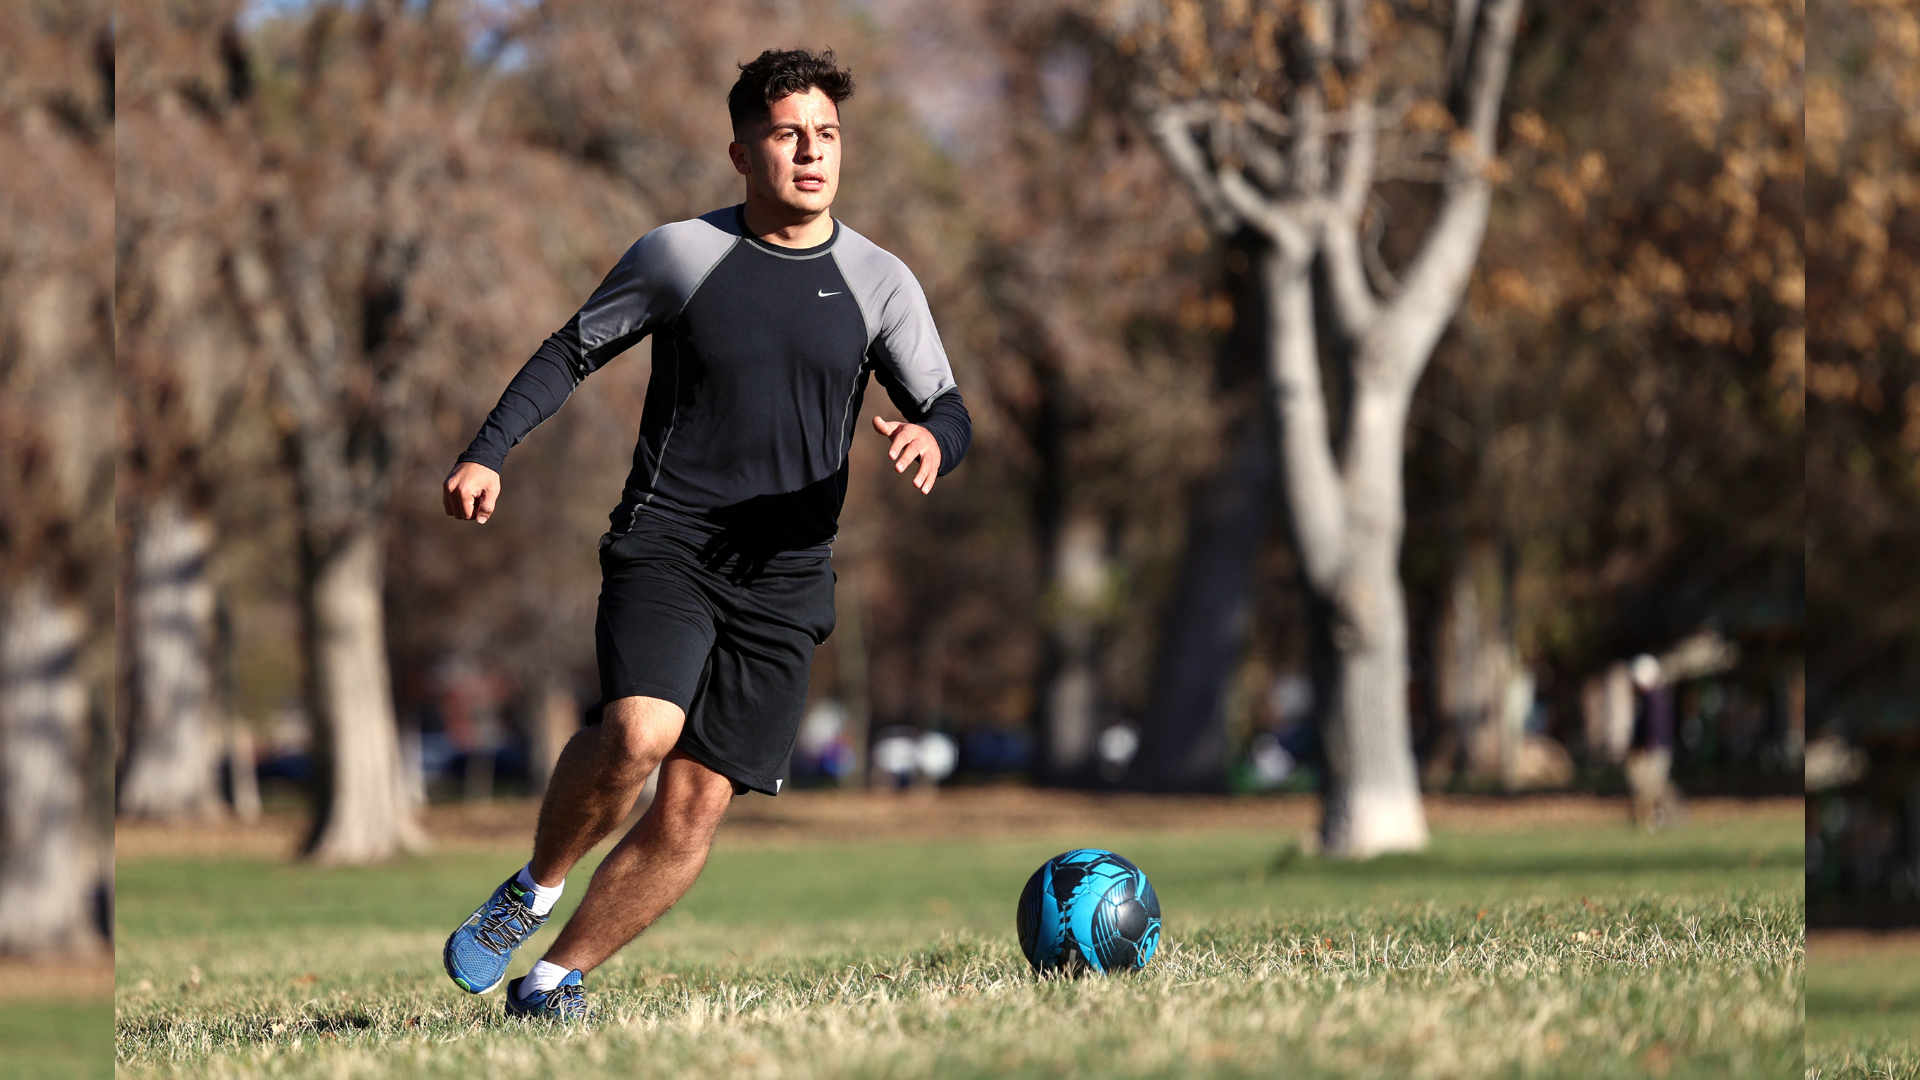 Tahim has played with and collaborated with the Utah-based group, Refugee Soccer. Mohammad Tamim So...